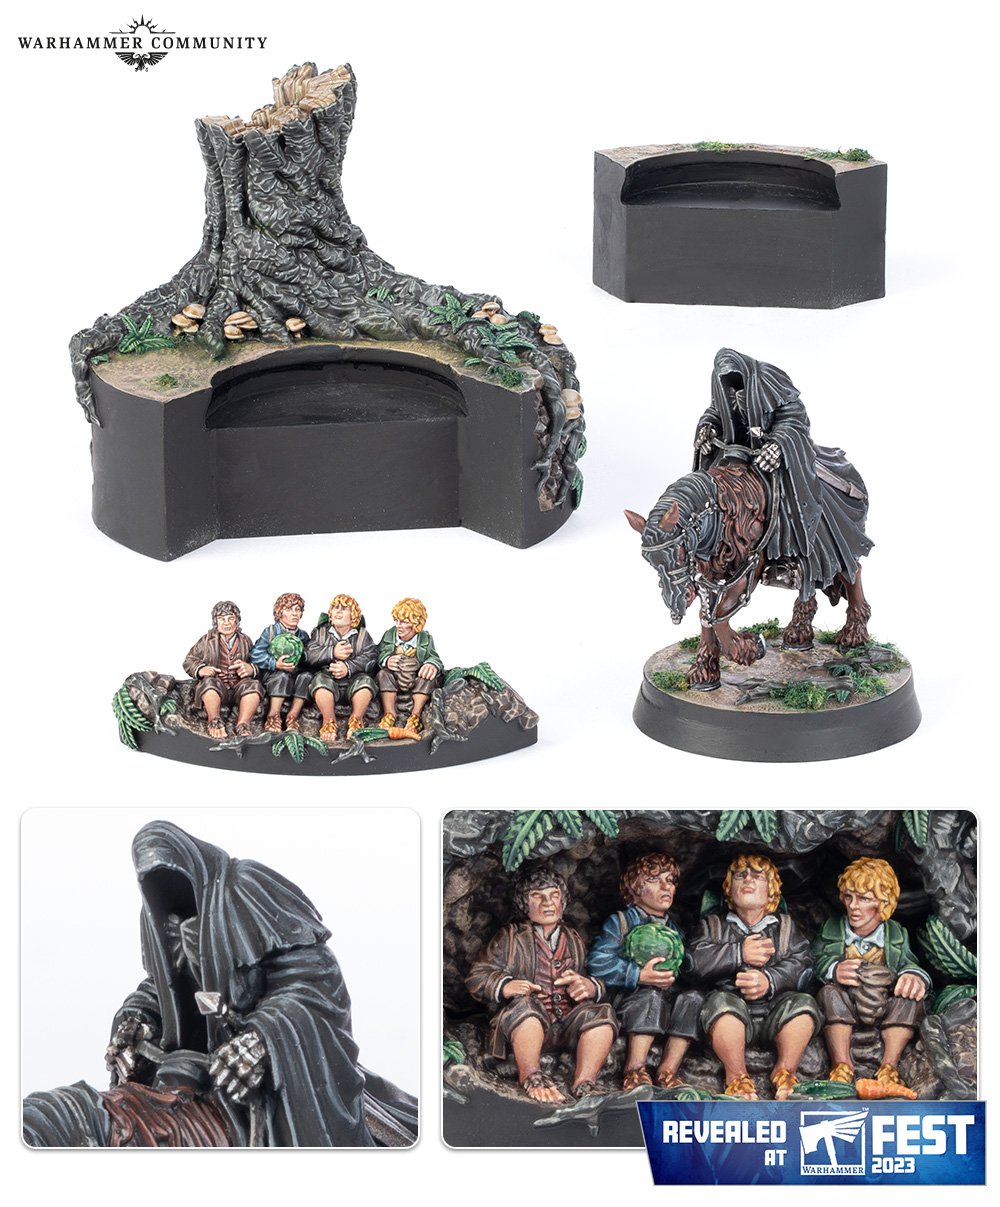 Caesar miniatures 1/72. Lord of the Rings Elves and Gondorian warriors